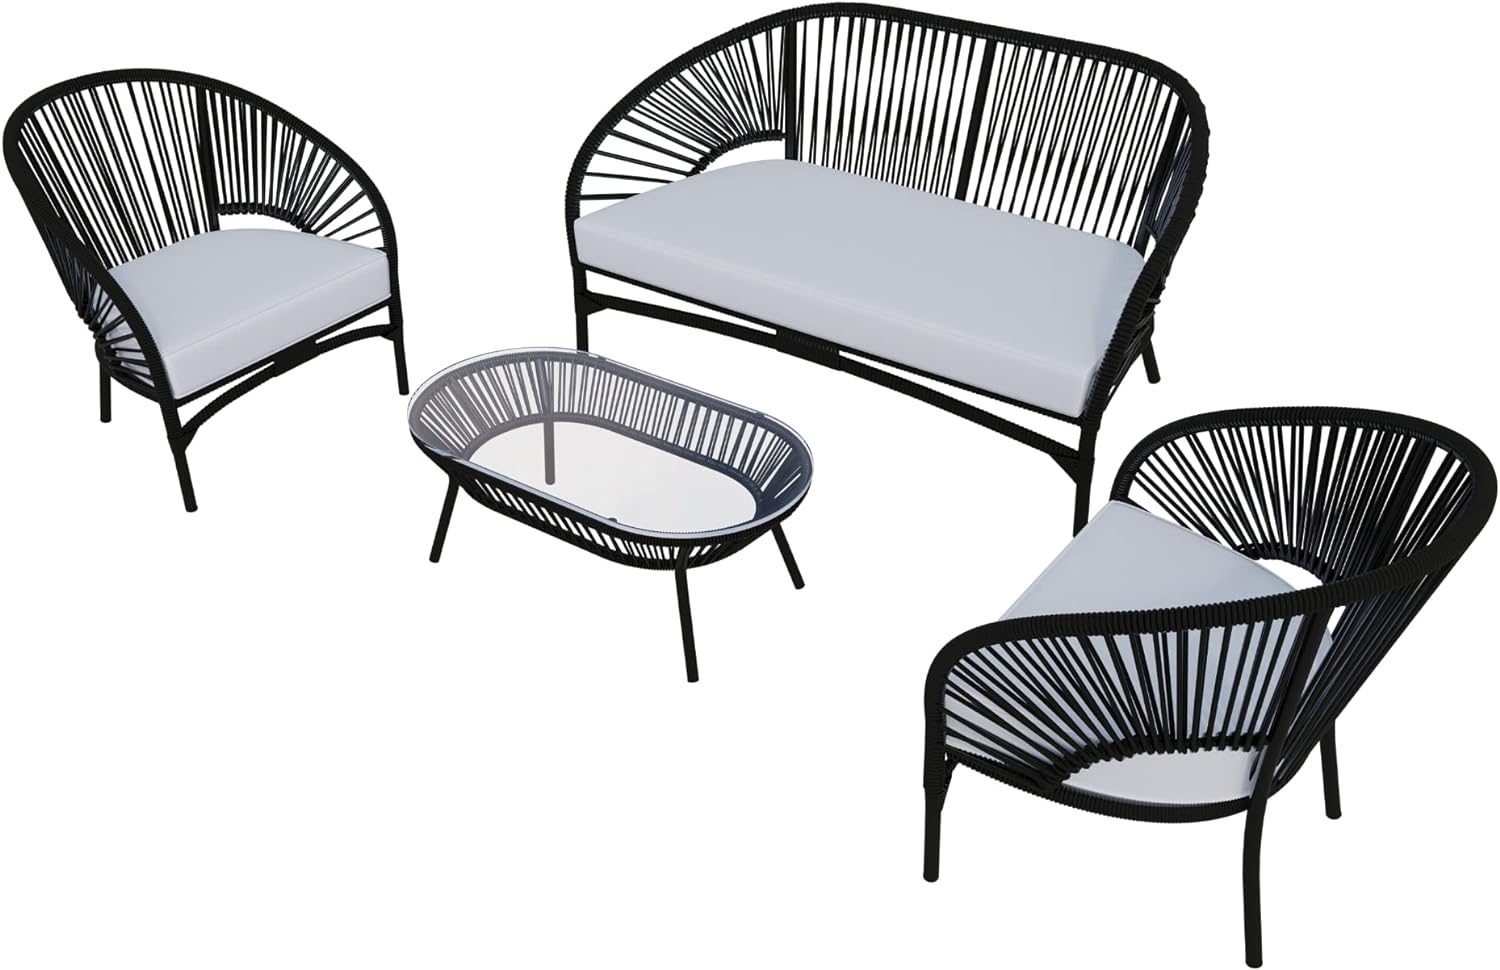 Pavilion Loveseat, 2 Chairs & Table 4 Piece Outdoor Set